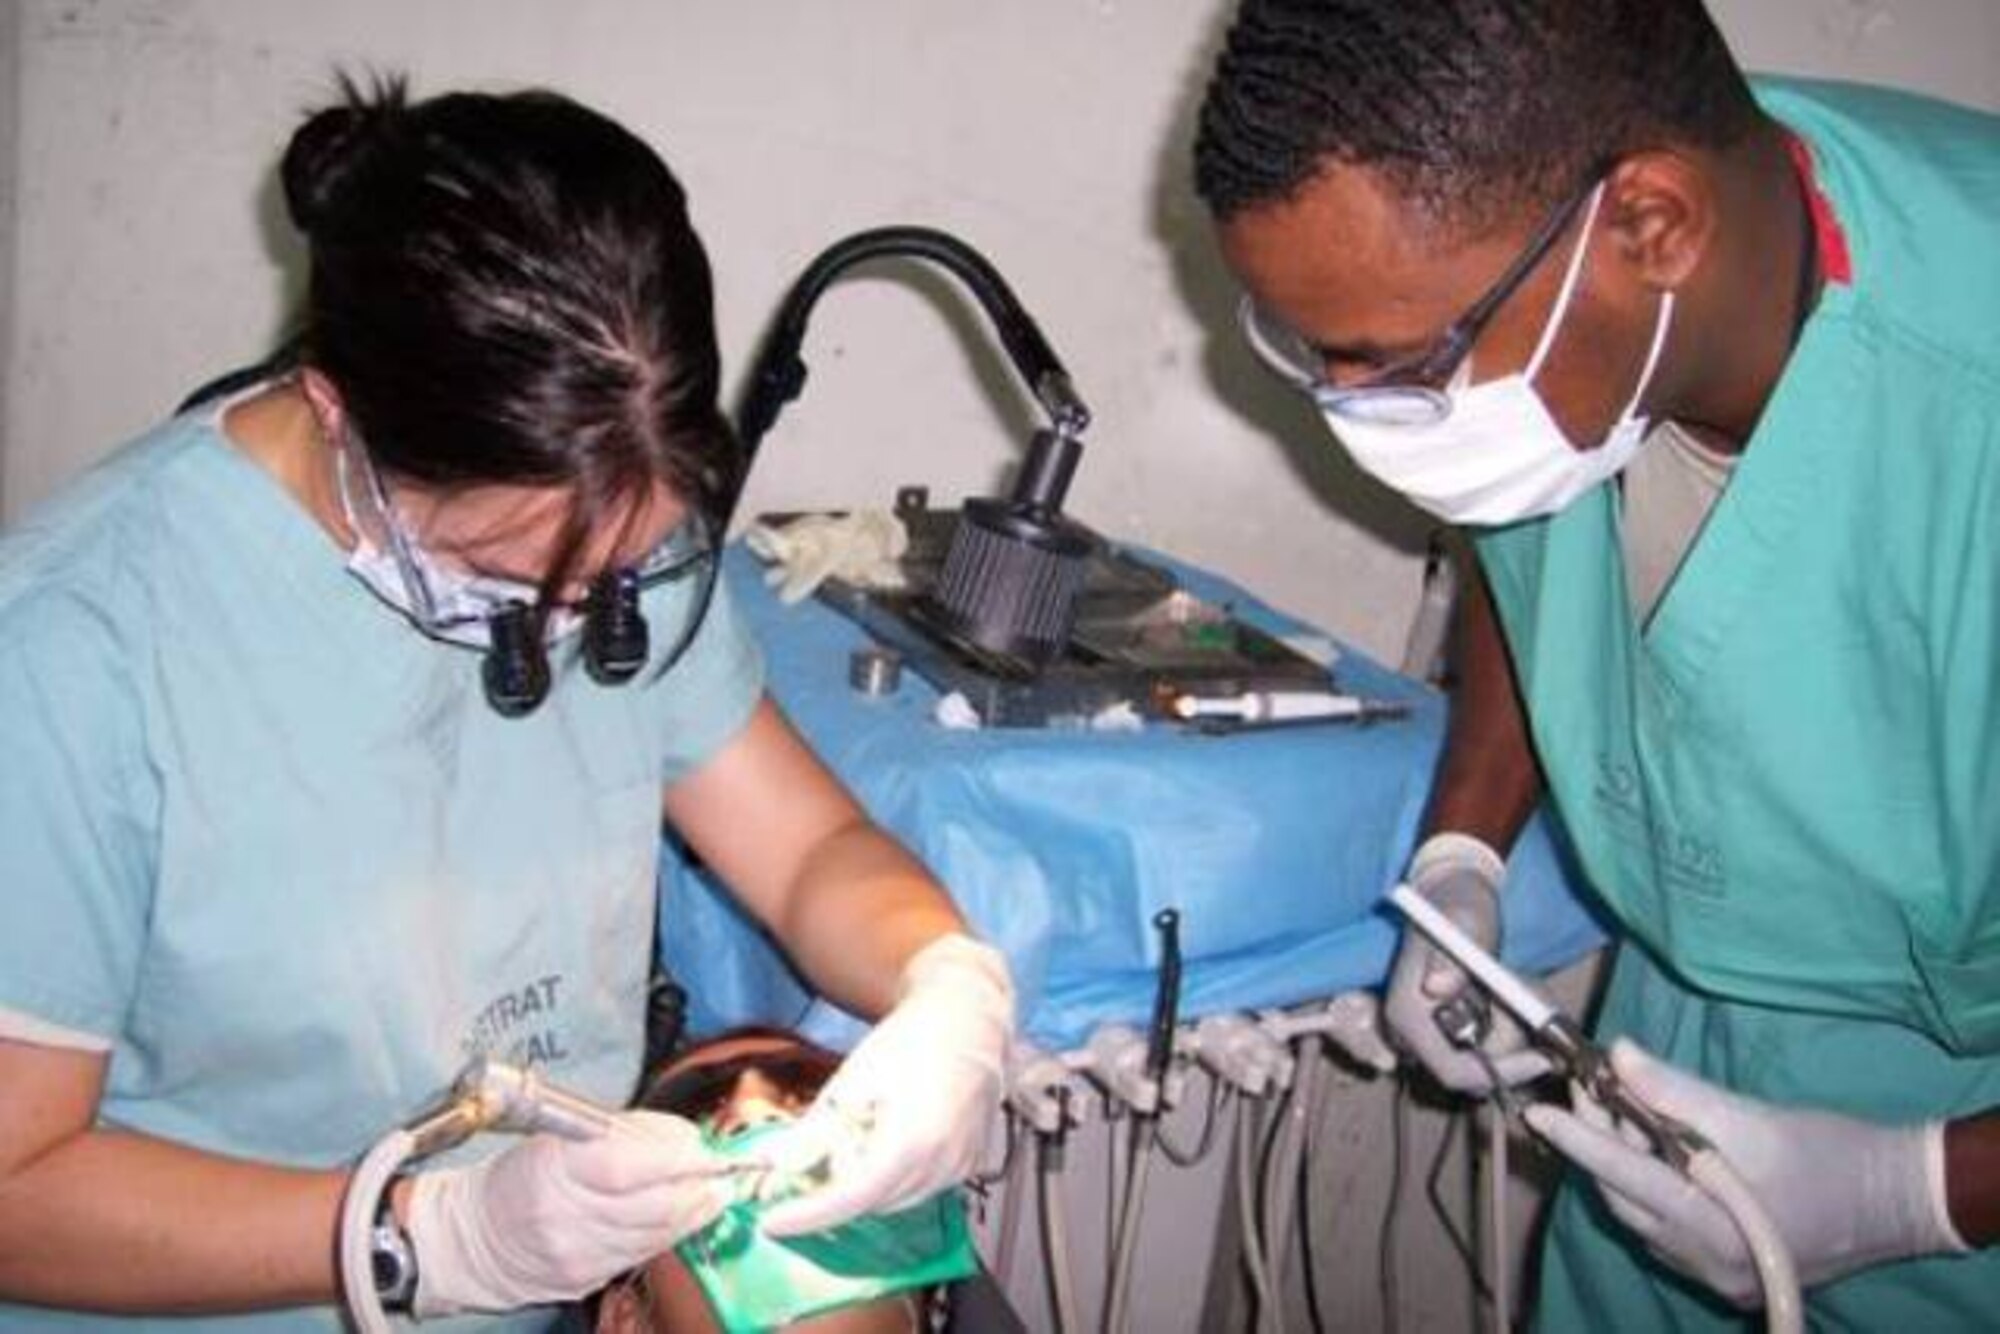 Capt. Heather Tellez, 1st Dental Squadron dentist, and Staff Sgt. Julian Moore, 2nd Dental Squadron dental assistant from Barksdale Air Force Base, La. take care of a patient while deployed to Zacatecoluca, El Salvador with first-ever All Dental Readiness Training Exercise team.  DENTRETE is the first humanitarian mission of its kind, and personnel deploy with modern equipment and supplies to provide a full spectrum of dental care.  For the duration of the mission the dental team provides care to include dental restorations (fillings), endodontics (root canals), extractions and dental prophylaxis (dental cleanings).  The staging area for the treatment was out of Destacamento Militario number nine in Zacatecoluca, El Salvador Sept. 8-18.   Surrounding communities were transported in for the free dental care over this 10-day period.  (photo provided by 1st Dental Squadron)